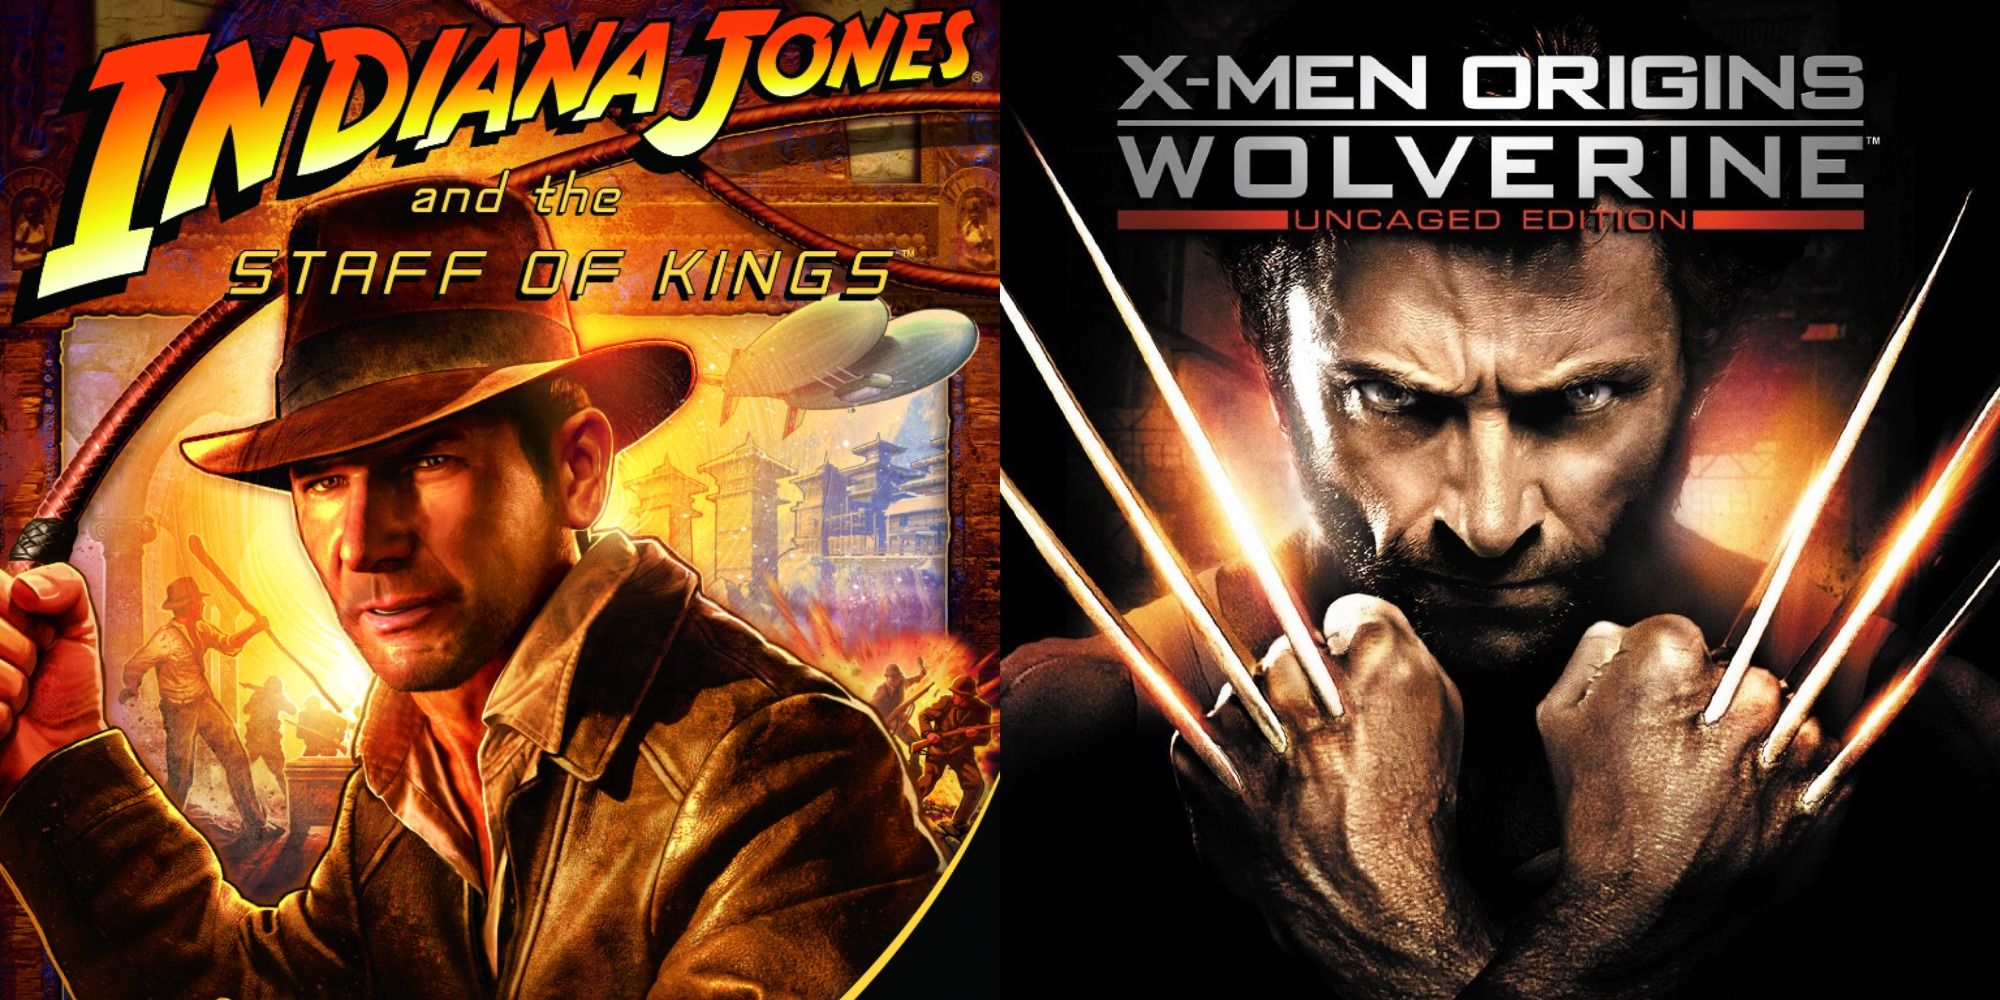 Split image showing the covers for the games Indiana Jones And The Staff Of Kings and X-Men Origins Wolverine